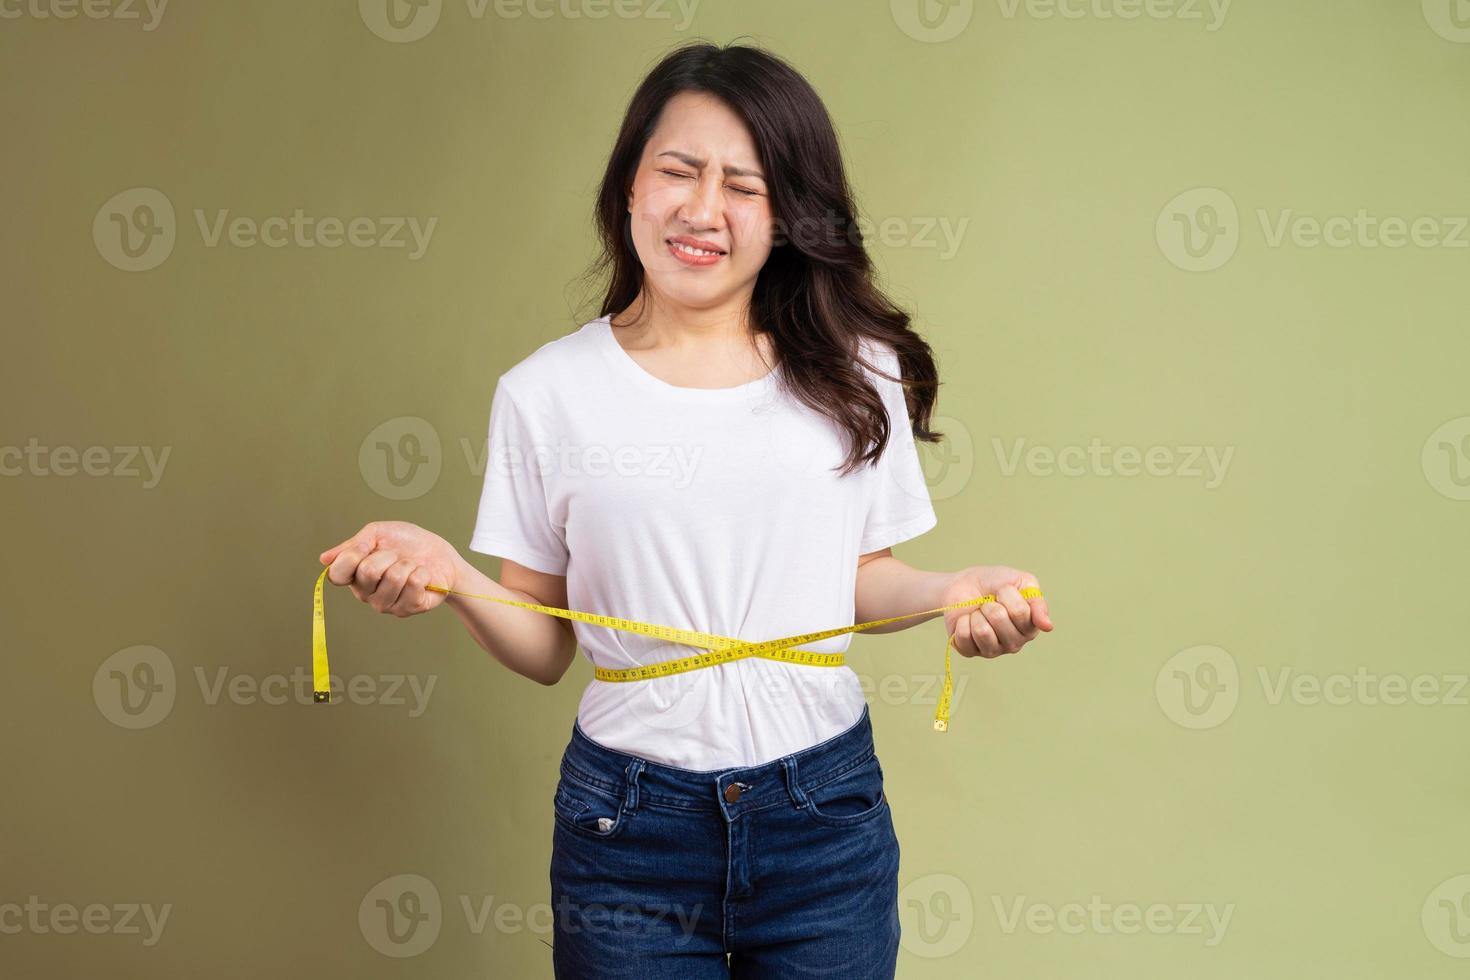 Young Asian girl holding a tape measure annoyed by weight gain photo